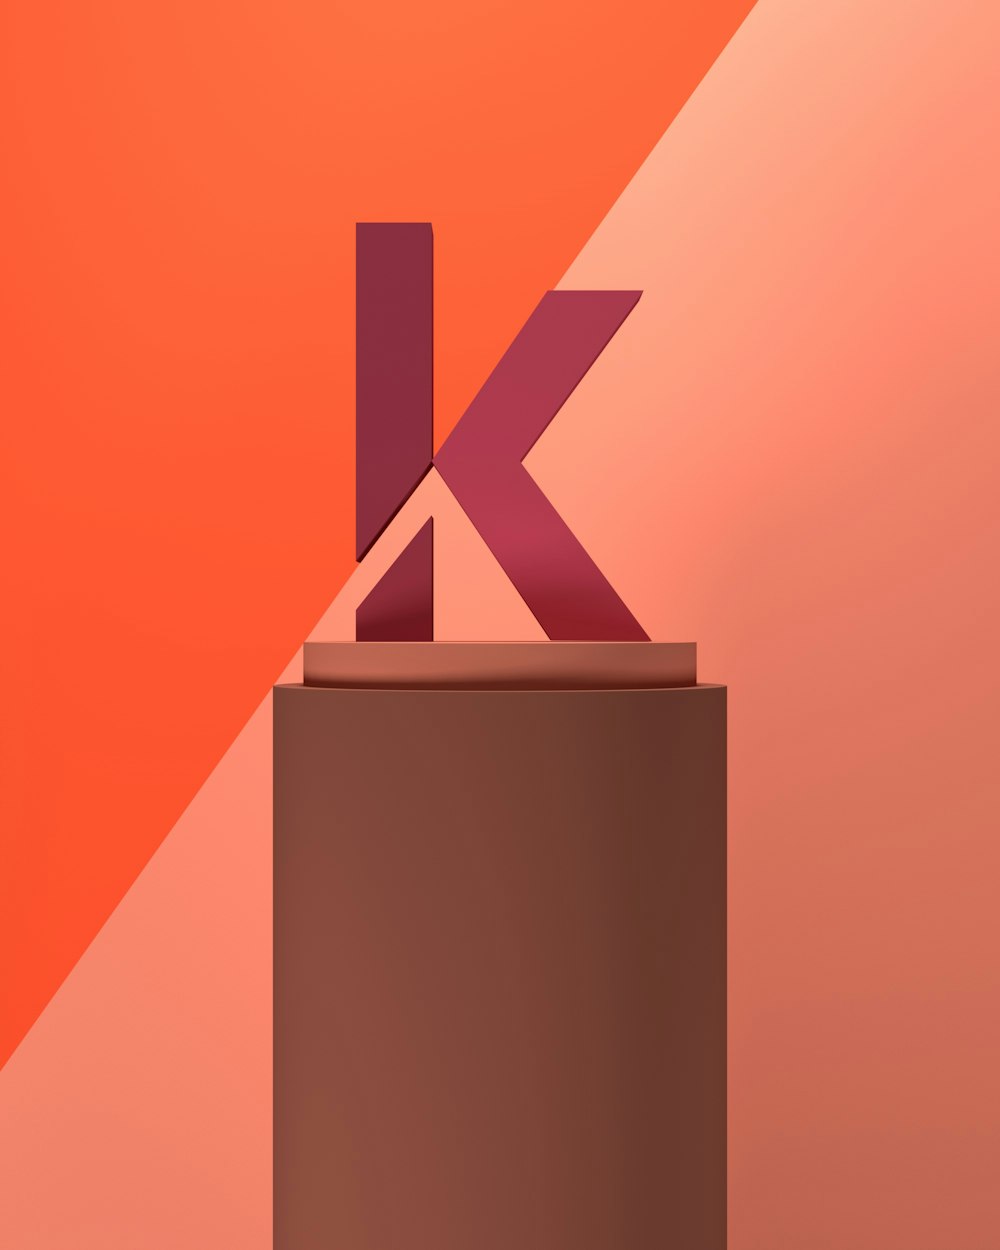 the letter k is placed on top of a box